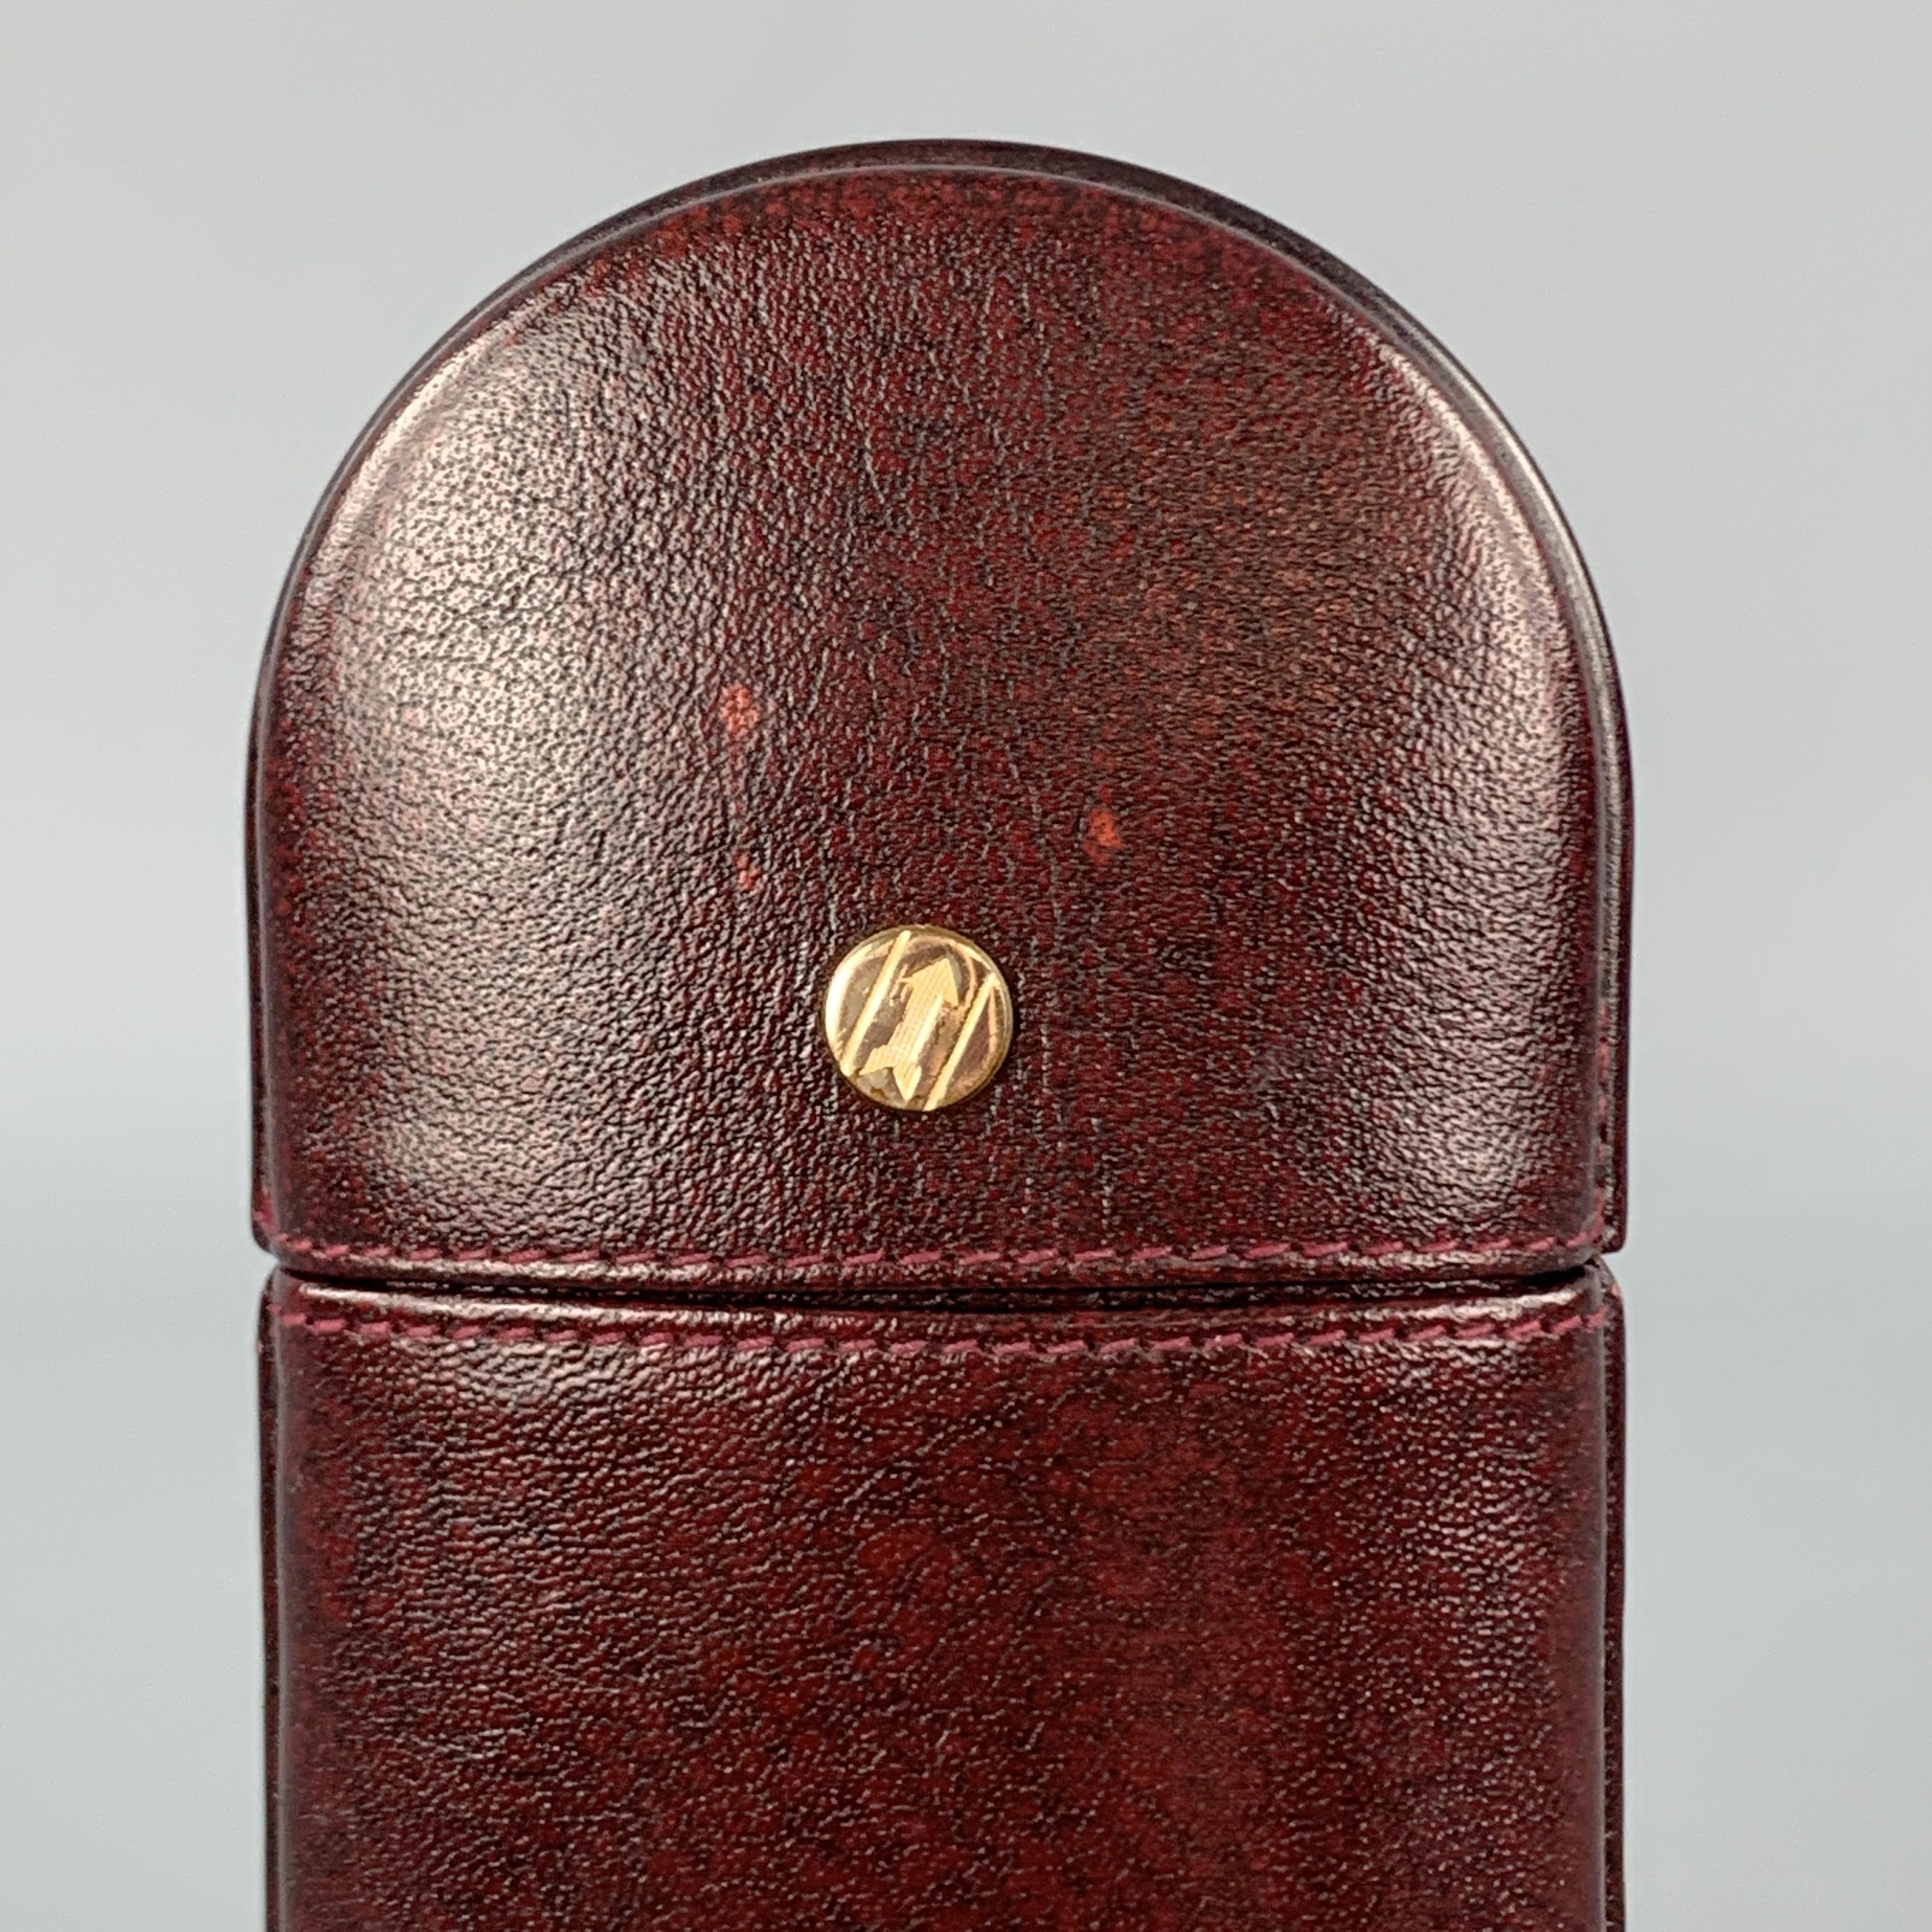 GOLDPFEIL sunglasses case comes in burgundy leather with a pop off top. 

Very Good Pre-Owned Condition.

Size: 6.5 x 3 in.
Width: 1 in.